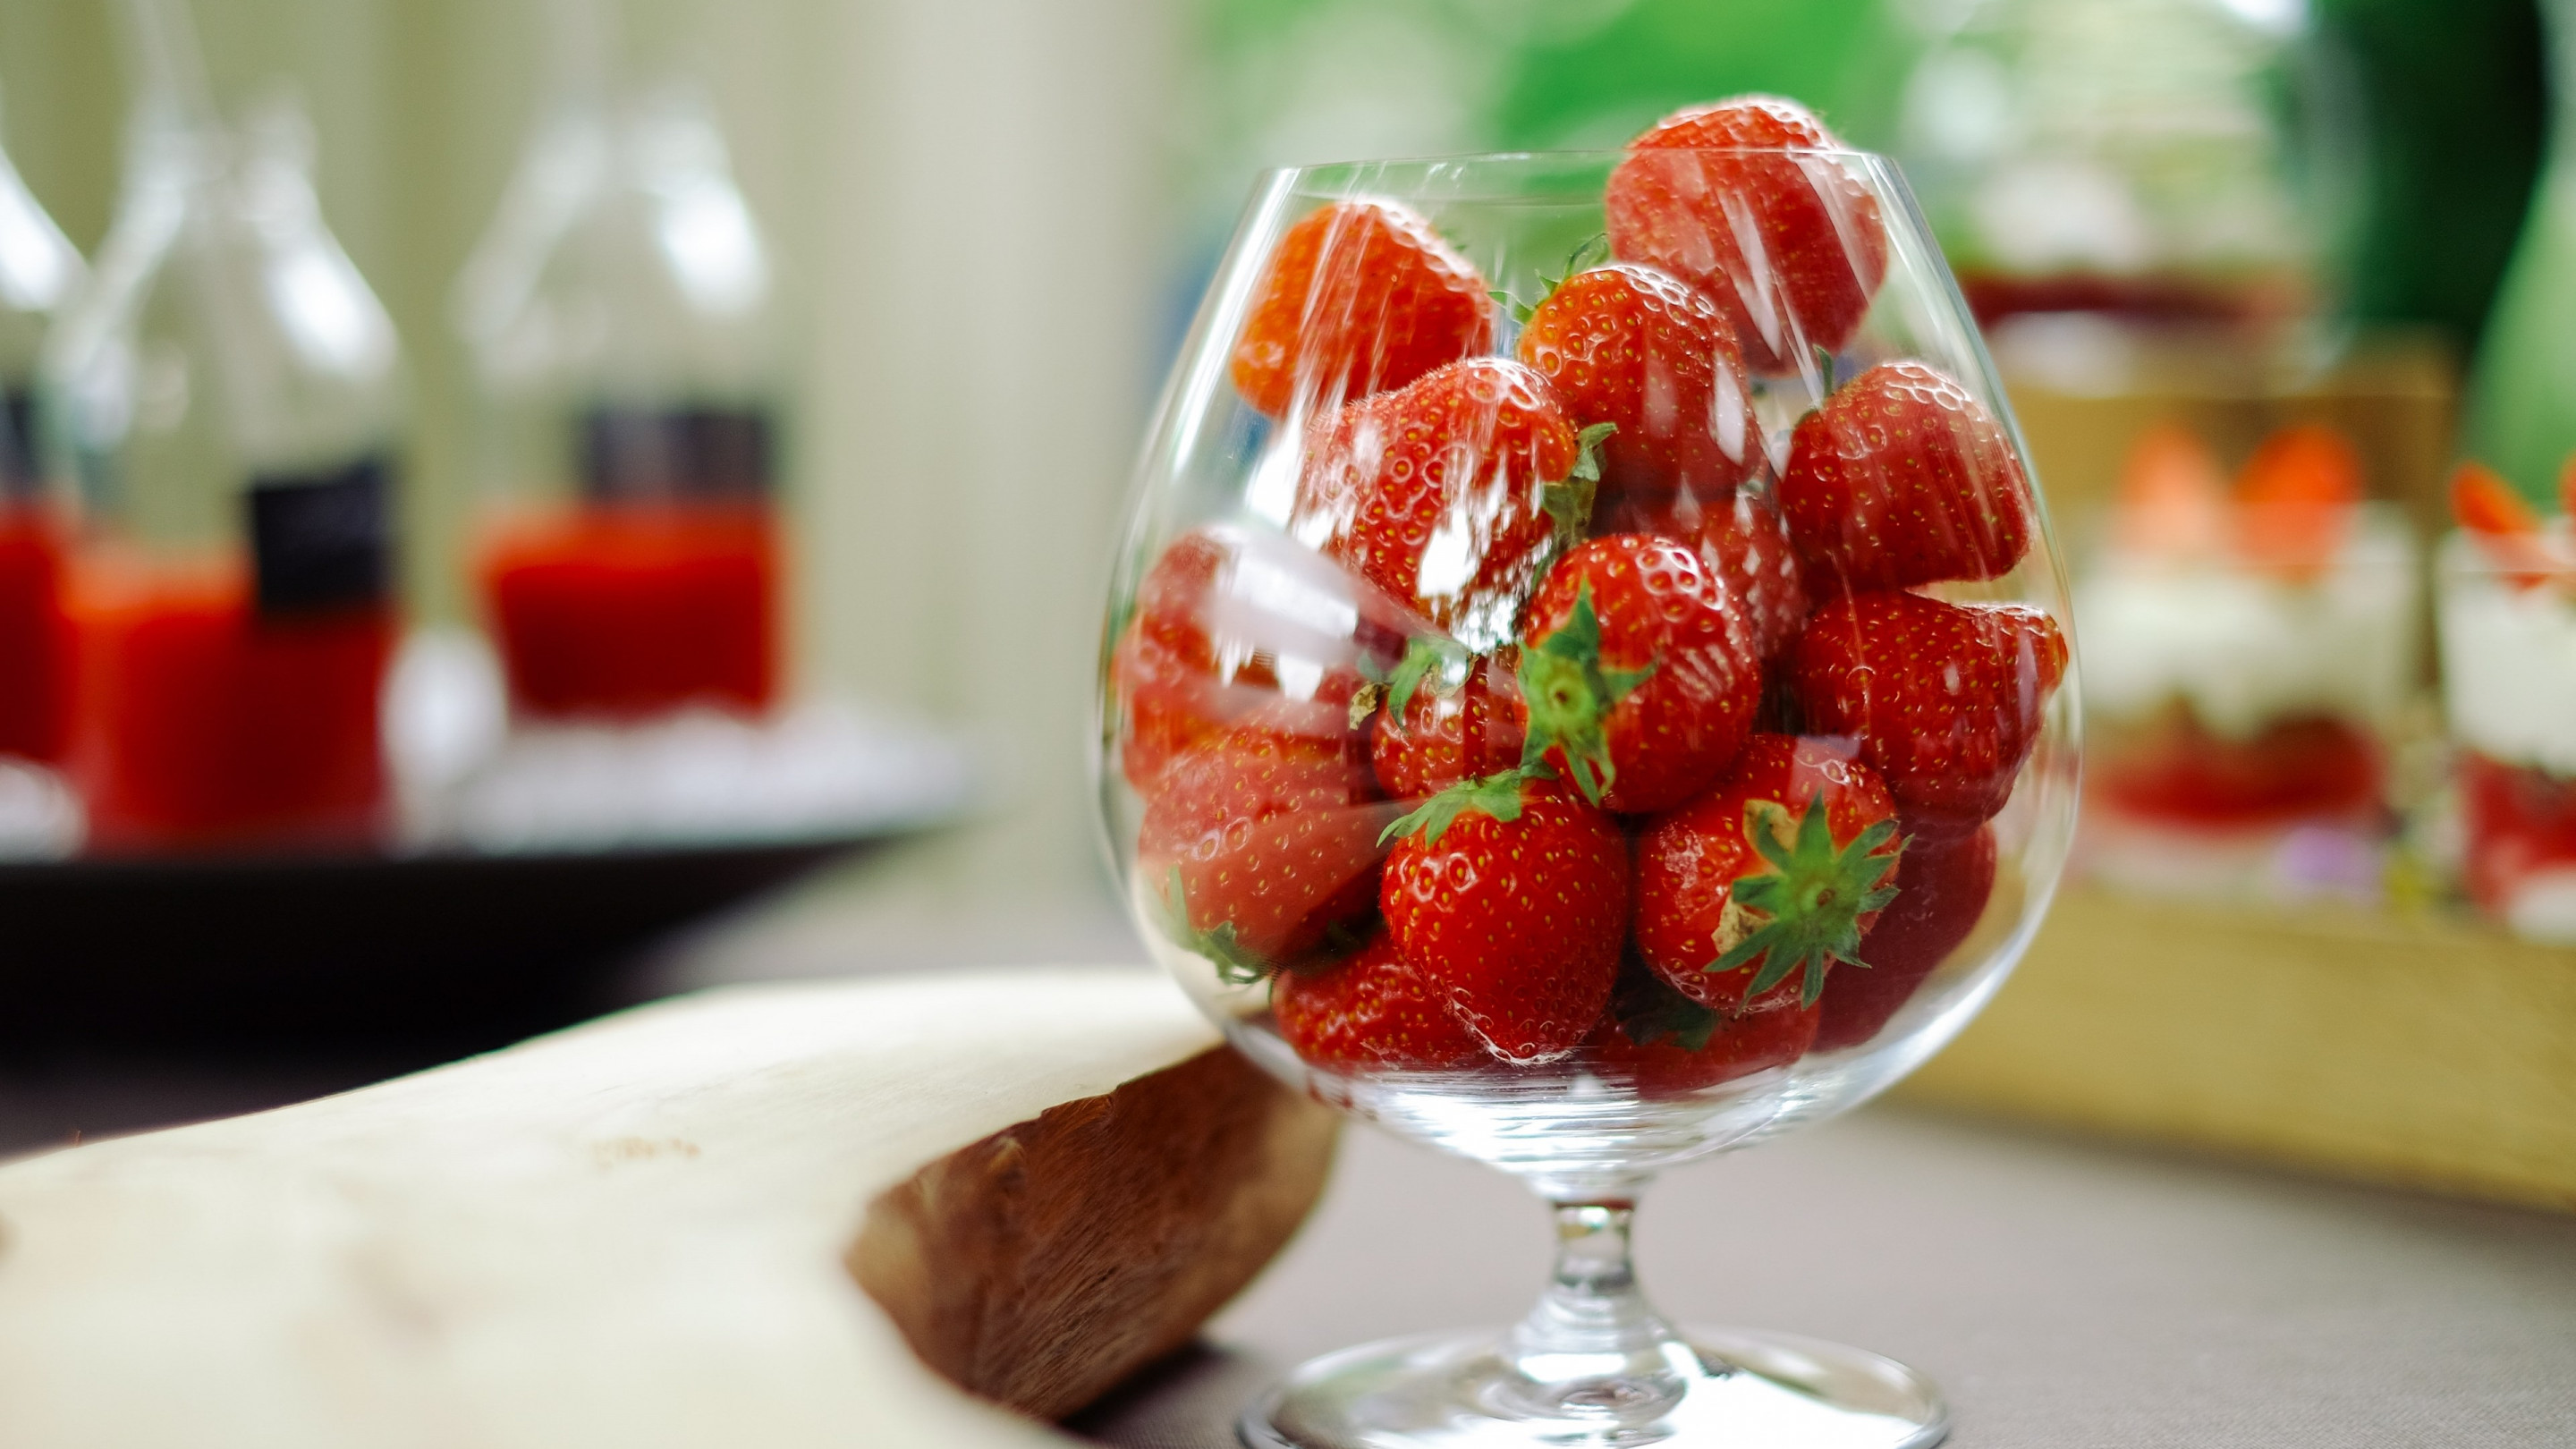 Glass with strawberries wallpaper 2880x1620